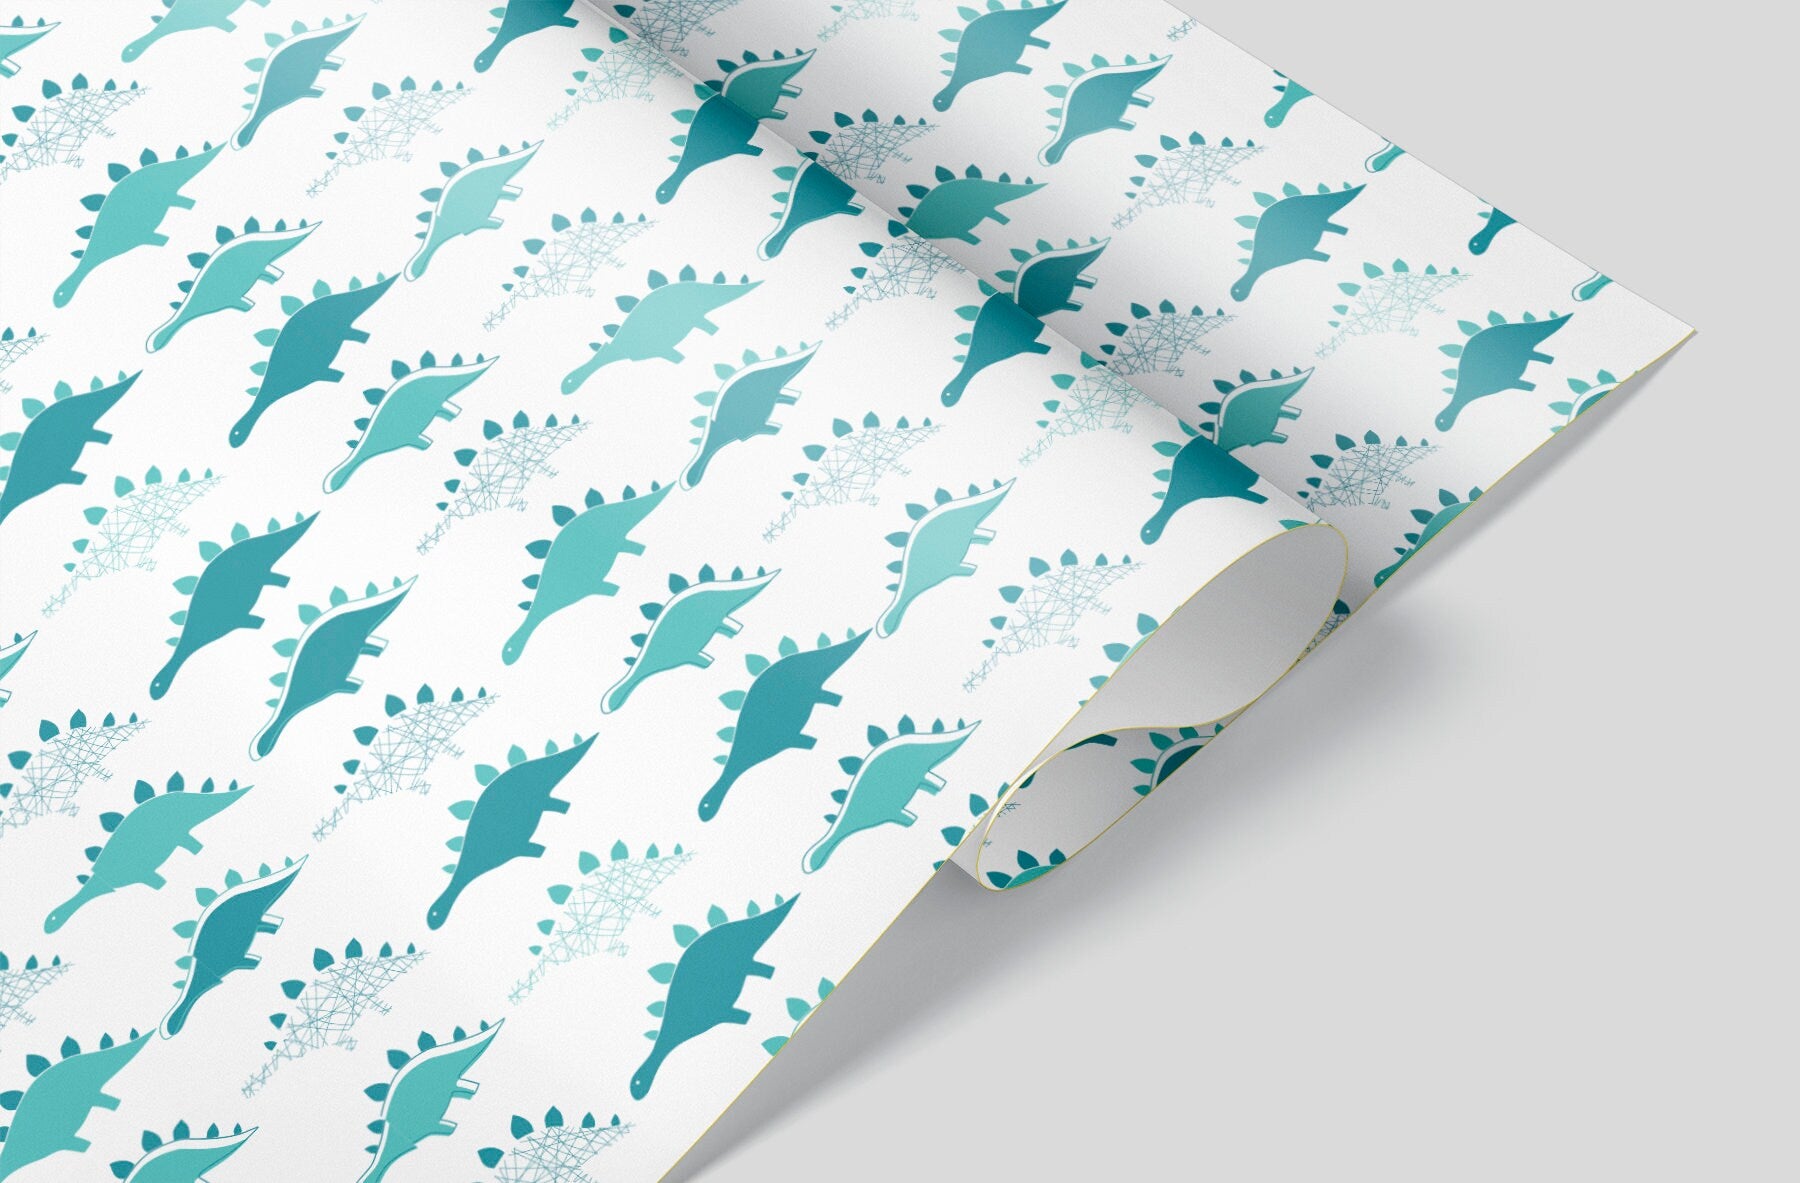 white wrapping paper with blue stegosaurus dinosaurs